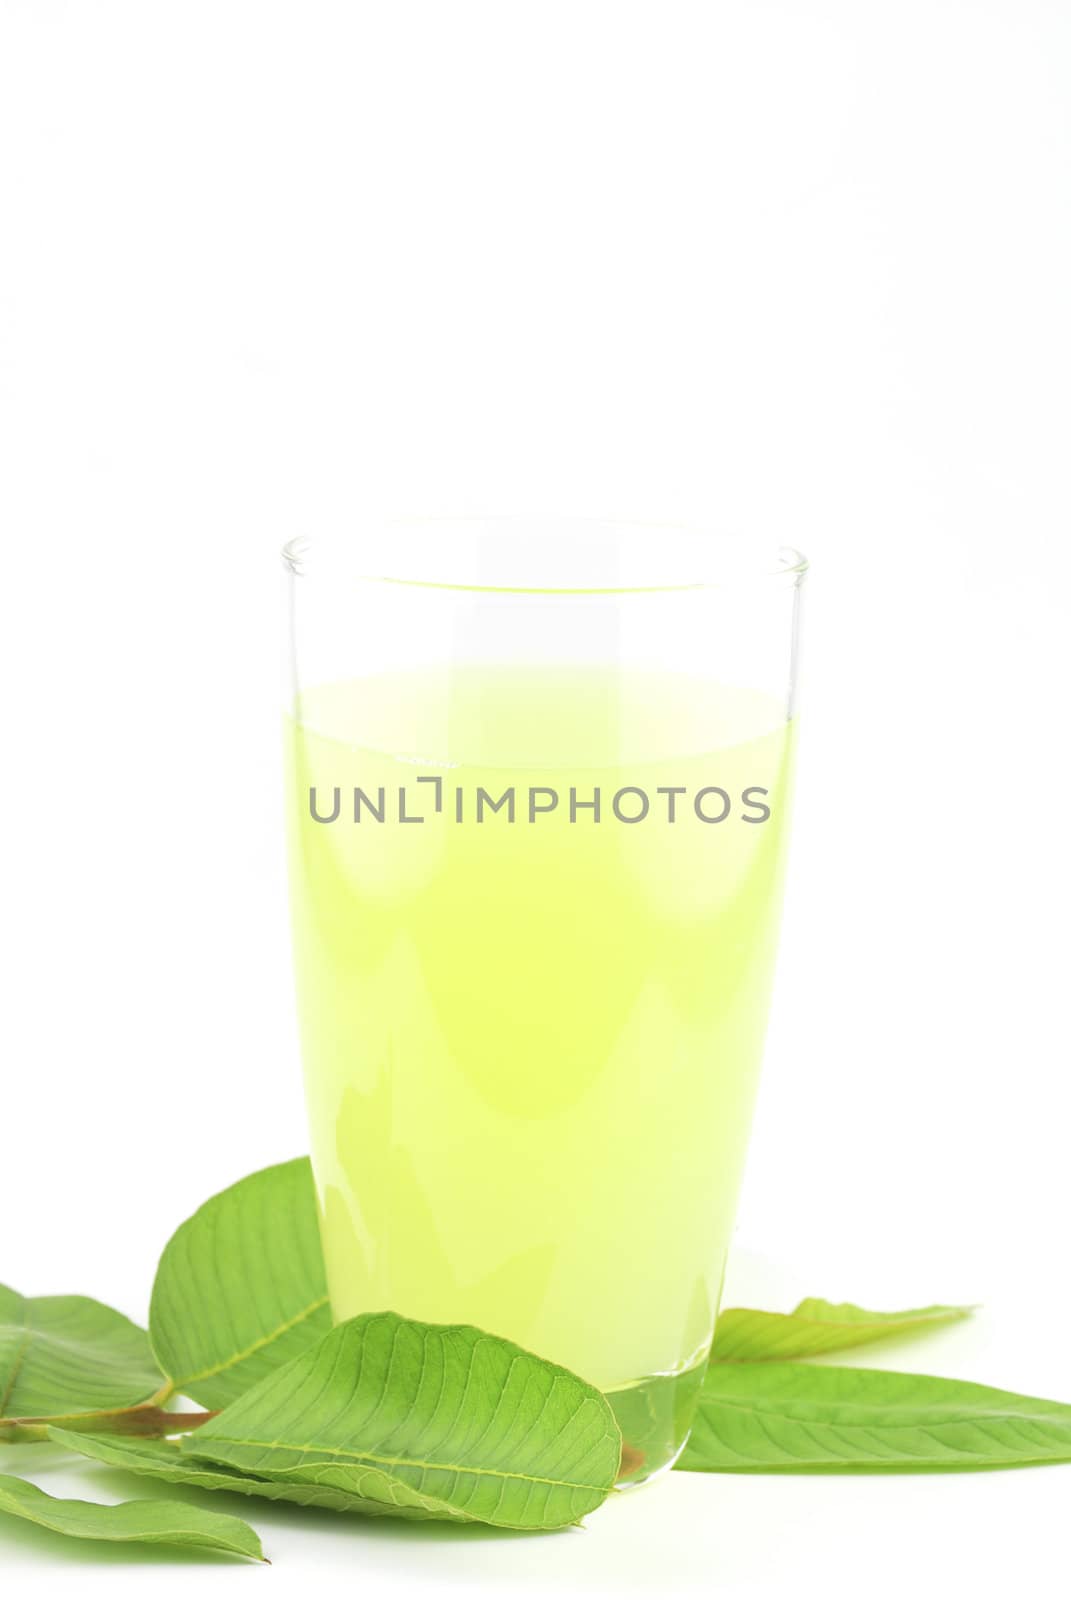 Guava and guava juice (tropical fruit) on white background